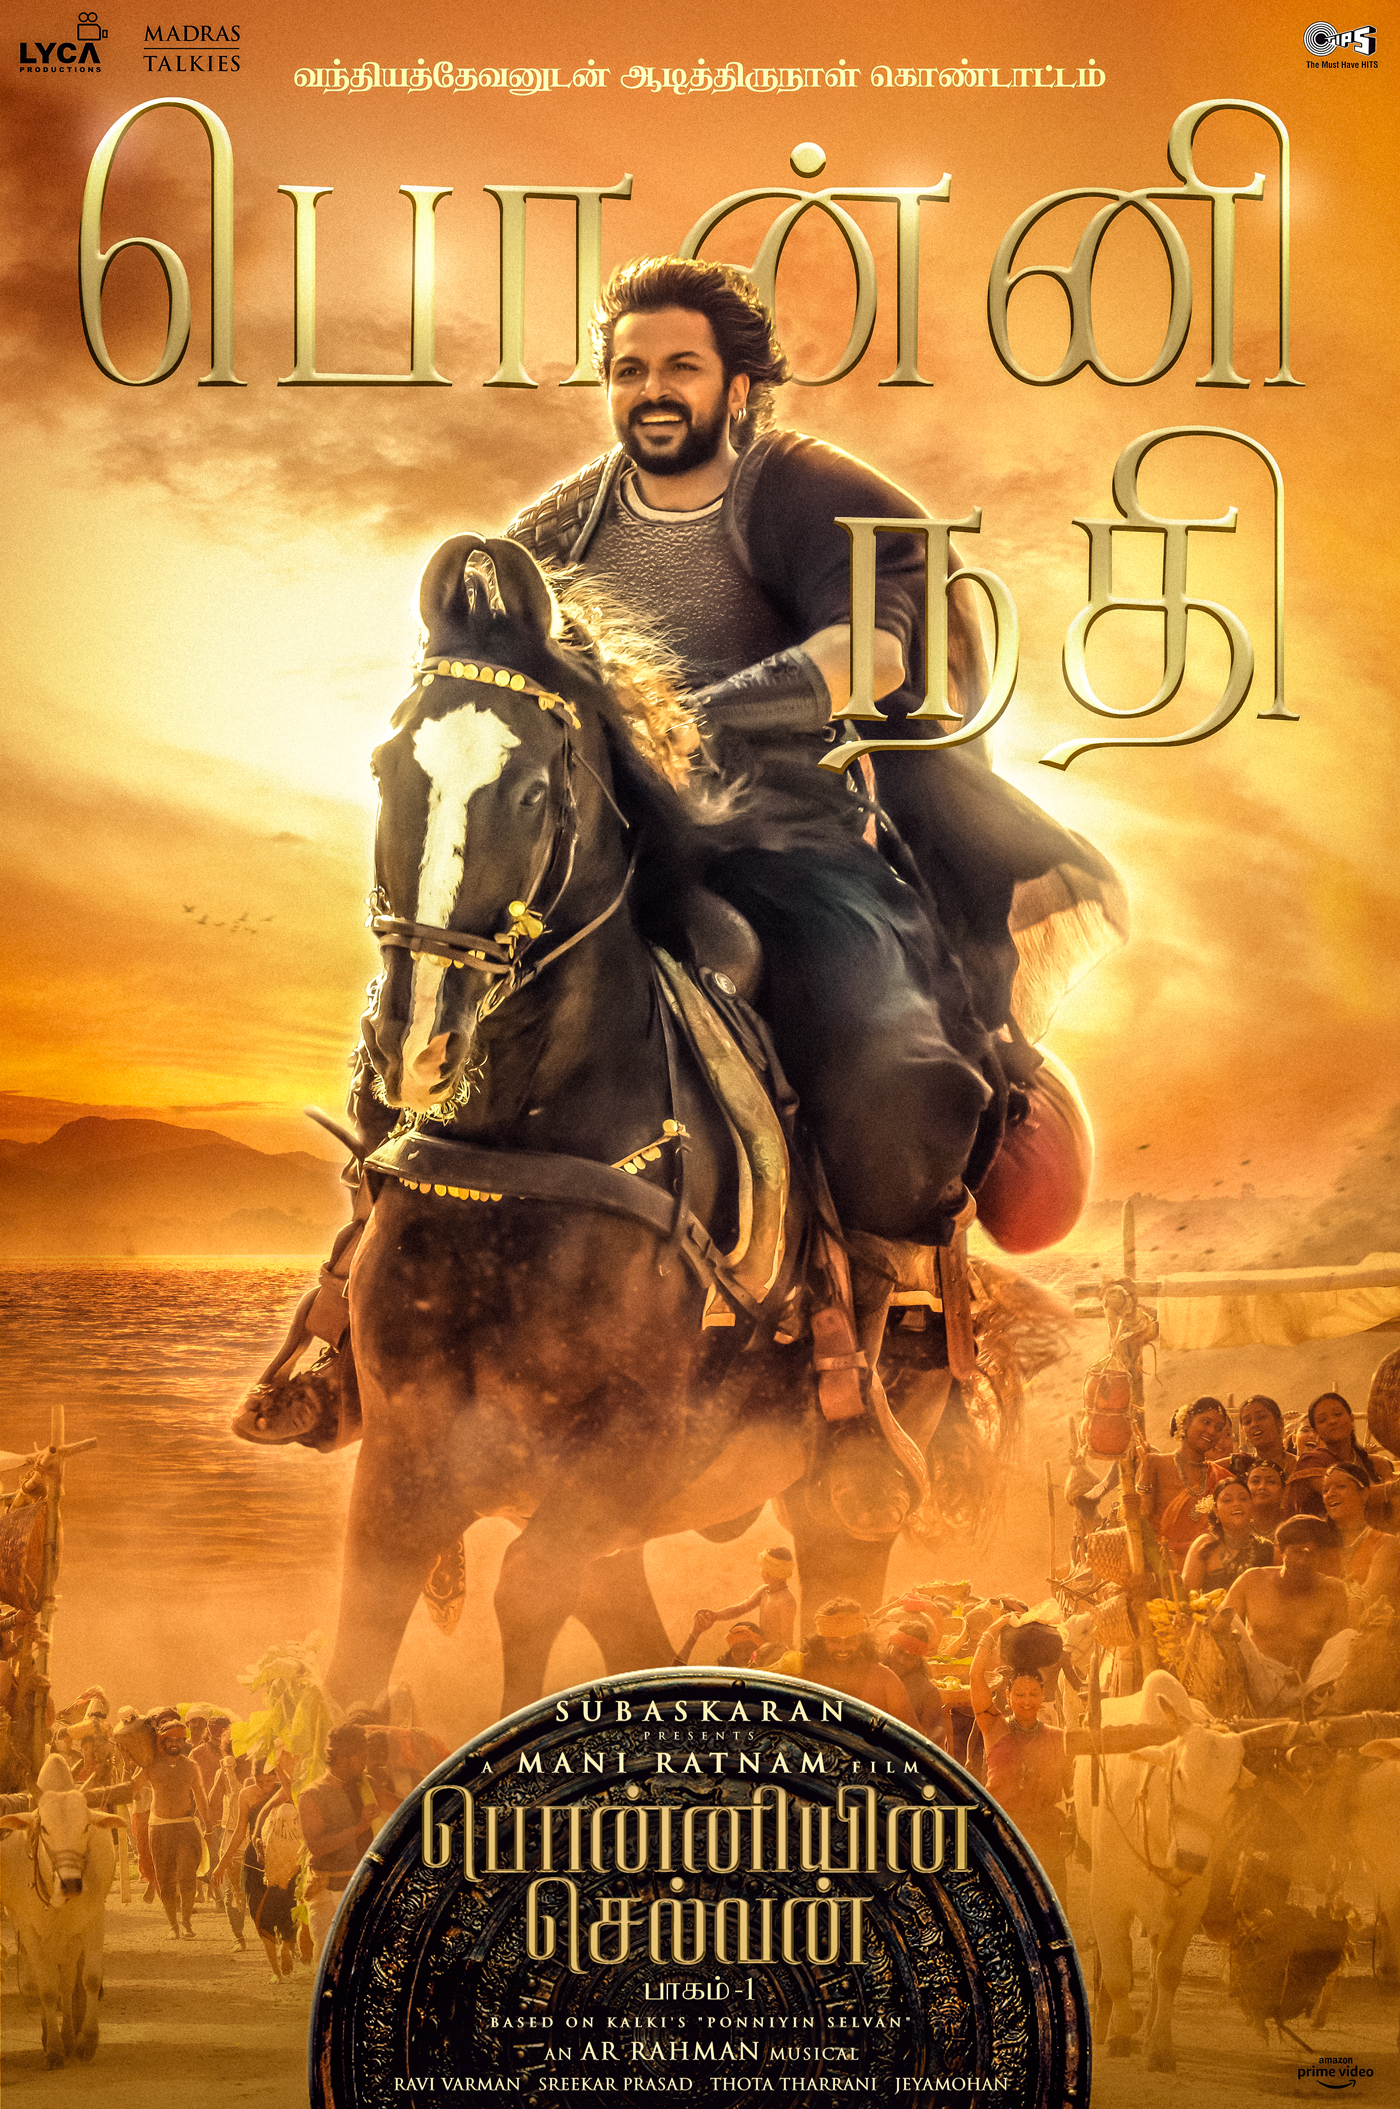 Ponniyin selvan first single release update with karthi poster